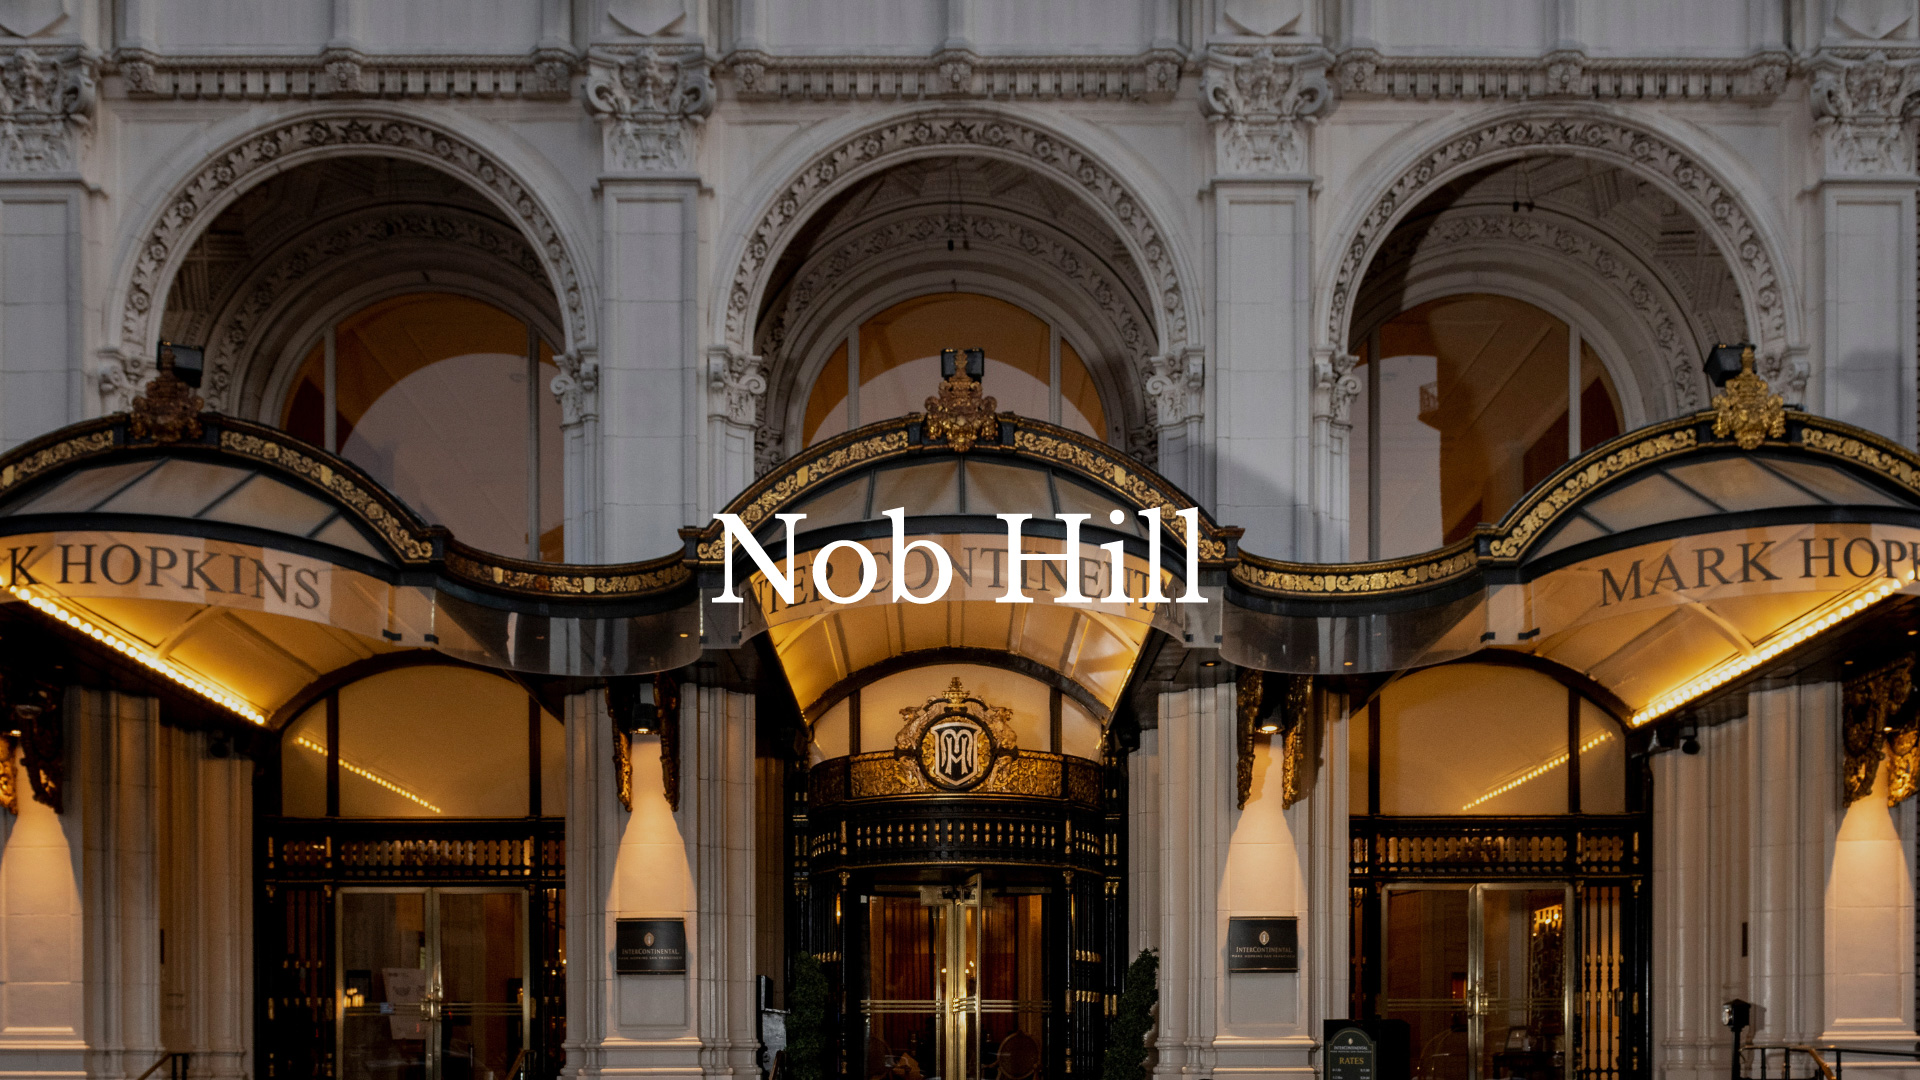 Exterior shot of the san francisco mark hopkins hotel with a "Nob Hill" text on top of the image 